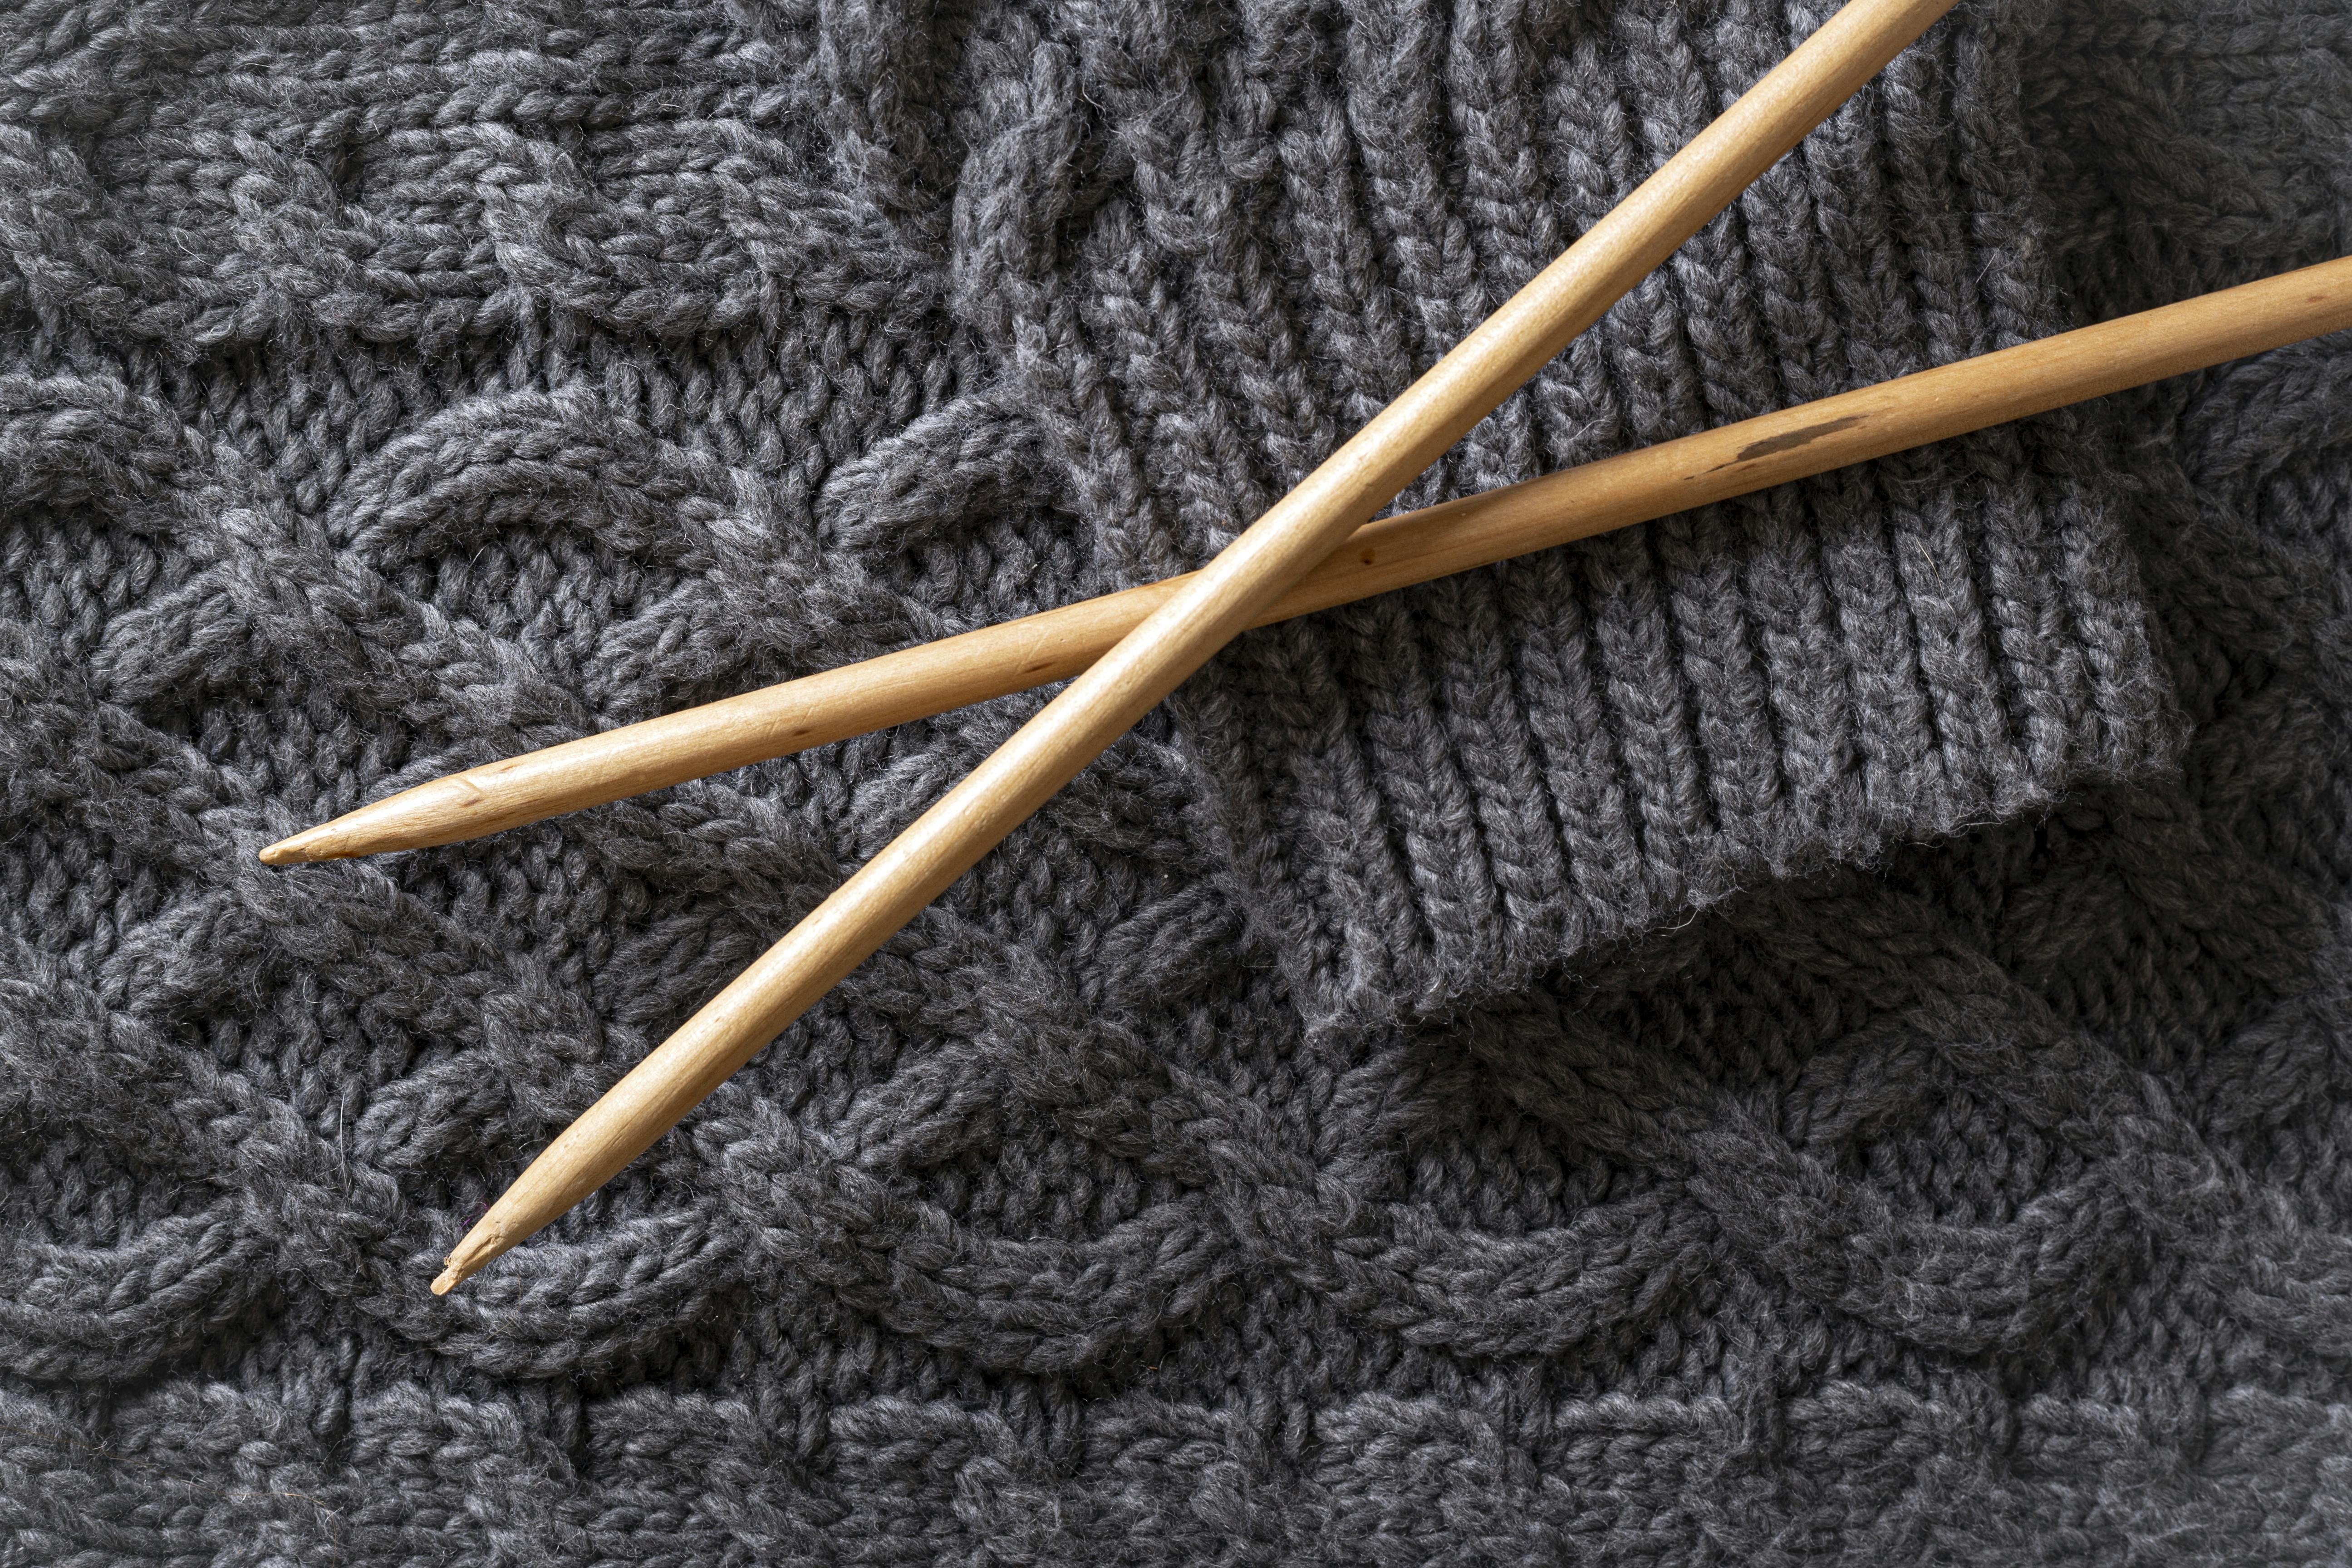  close up of cable knit technique on grey sweater